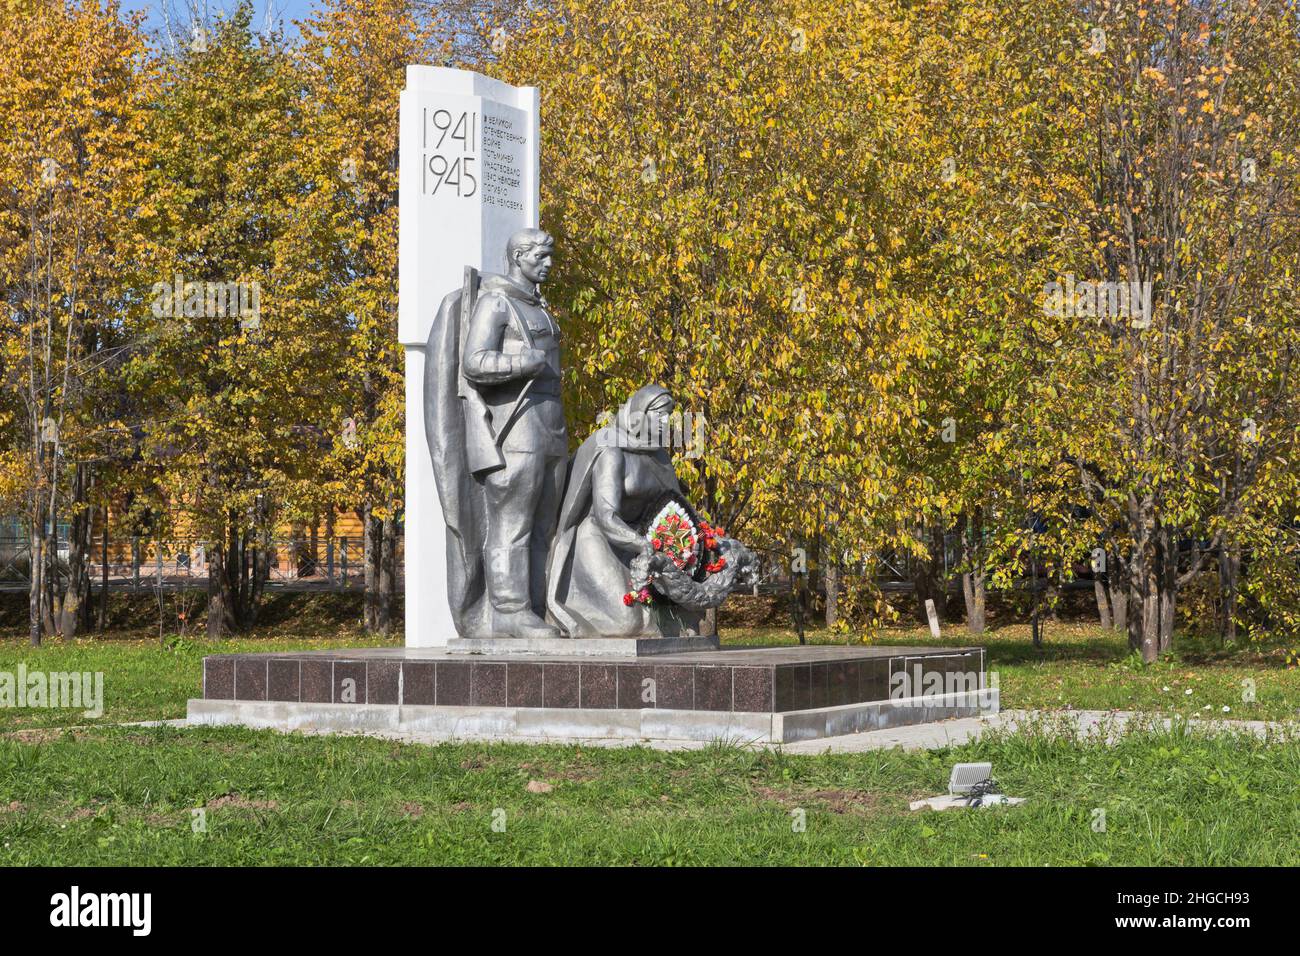 Totma, Vologda region, Russia - September 24, 2020: Monument to the heroes of the Great Patriotic War in the autumn garden of the Fighters for Freedom Stock Photo